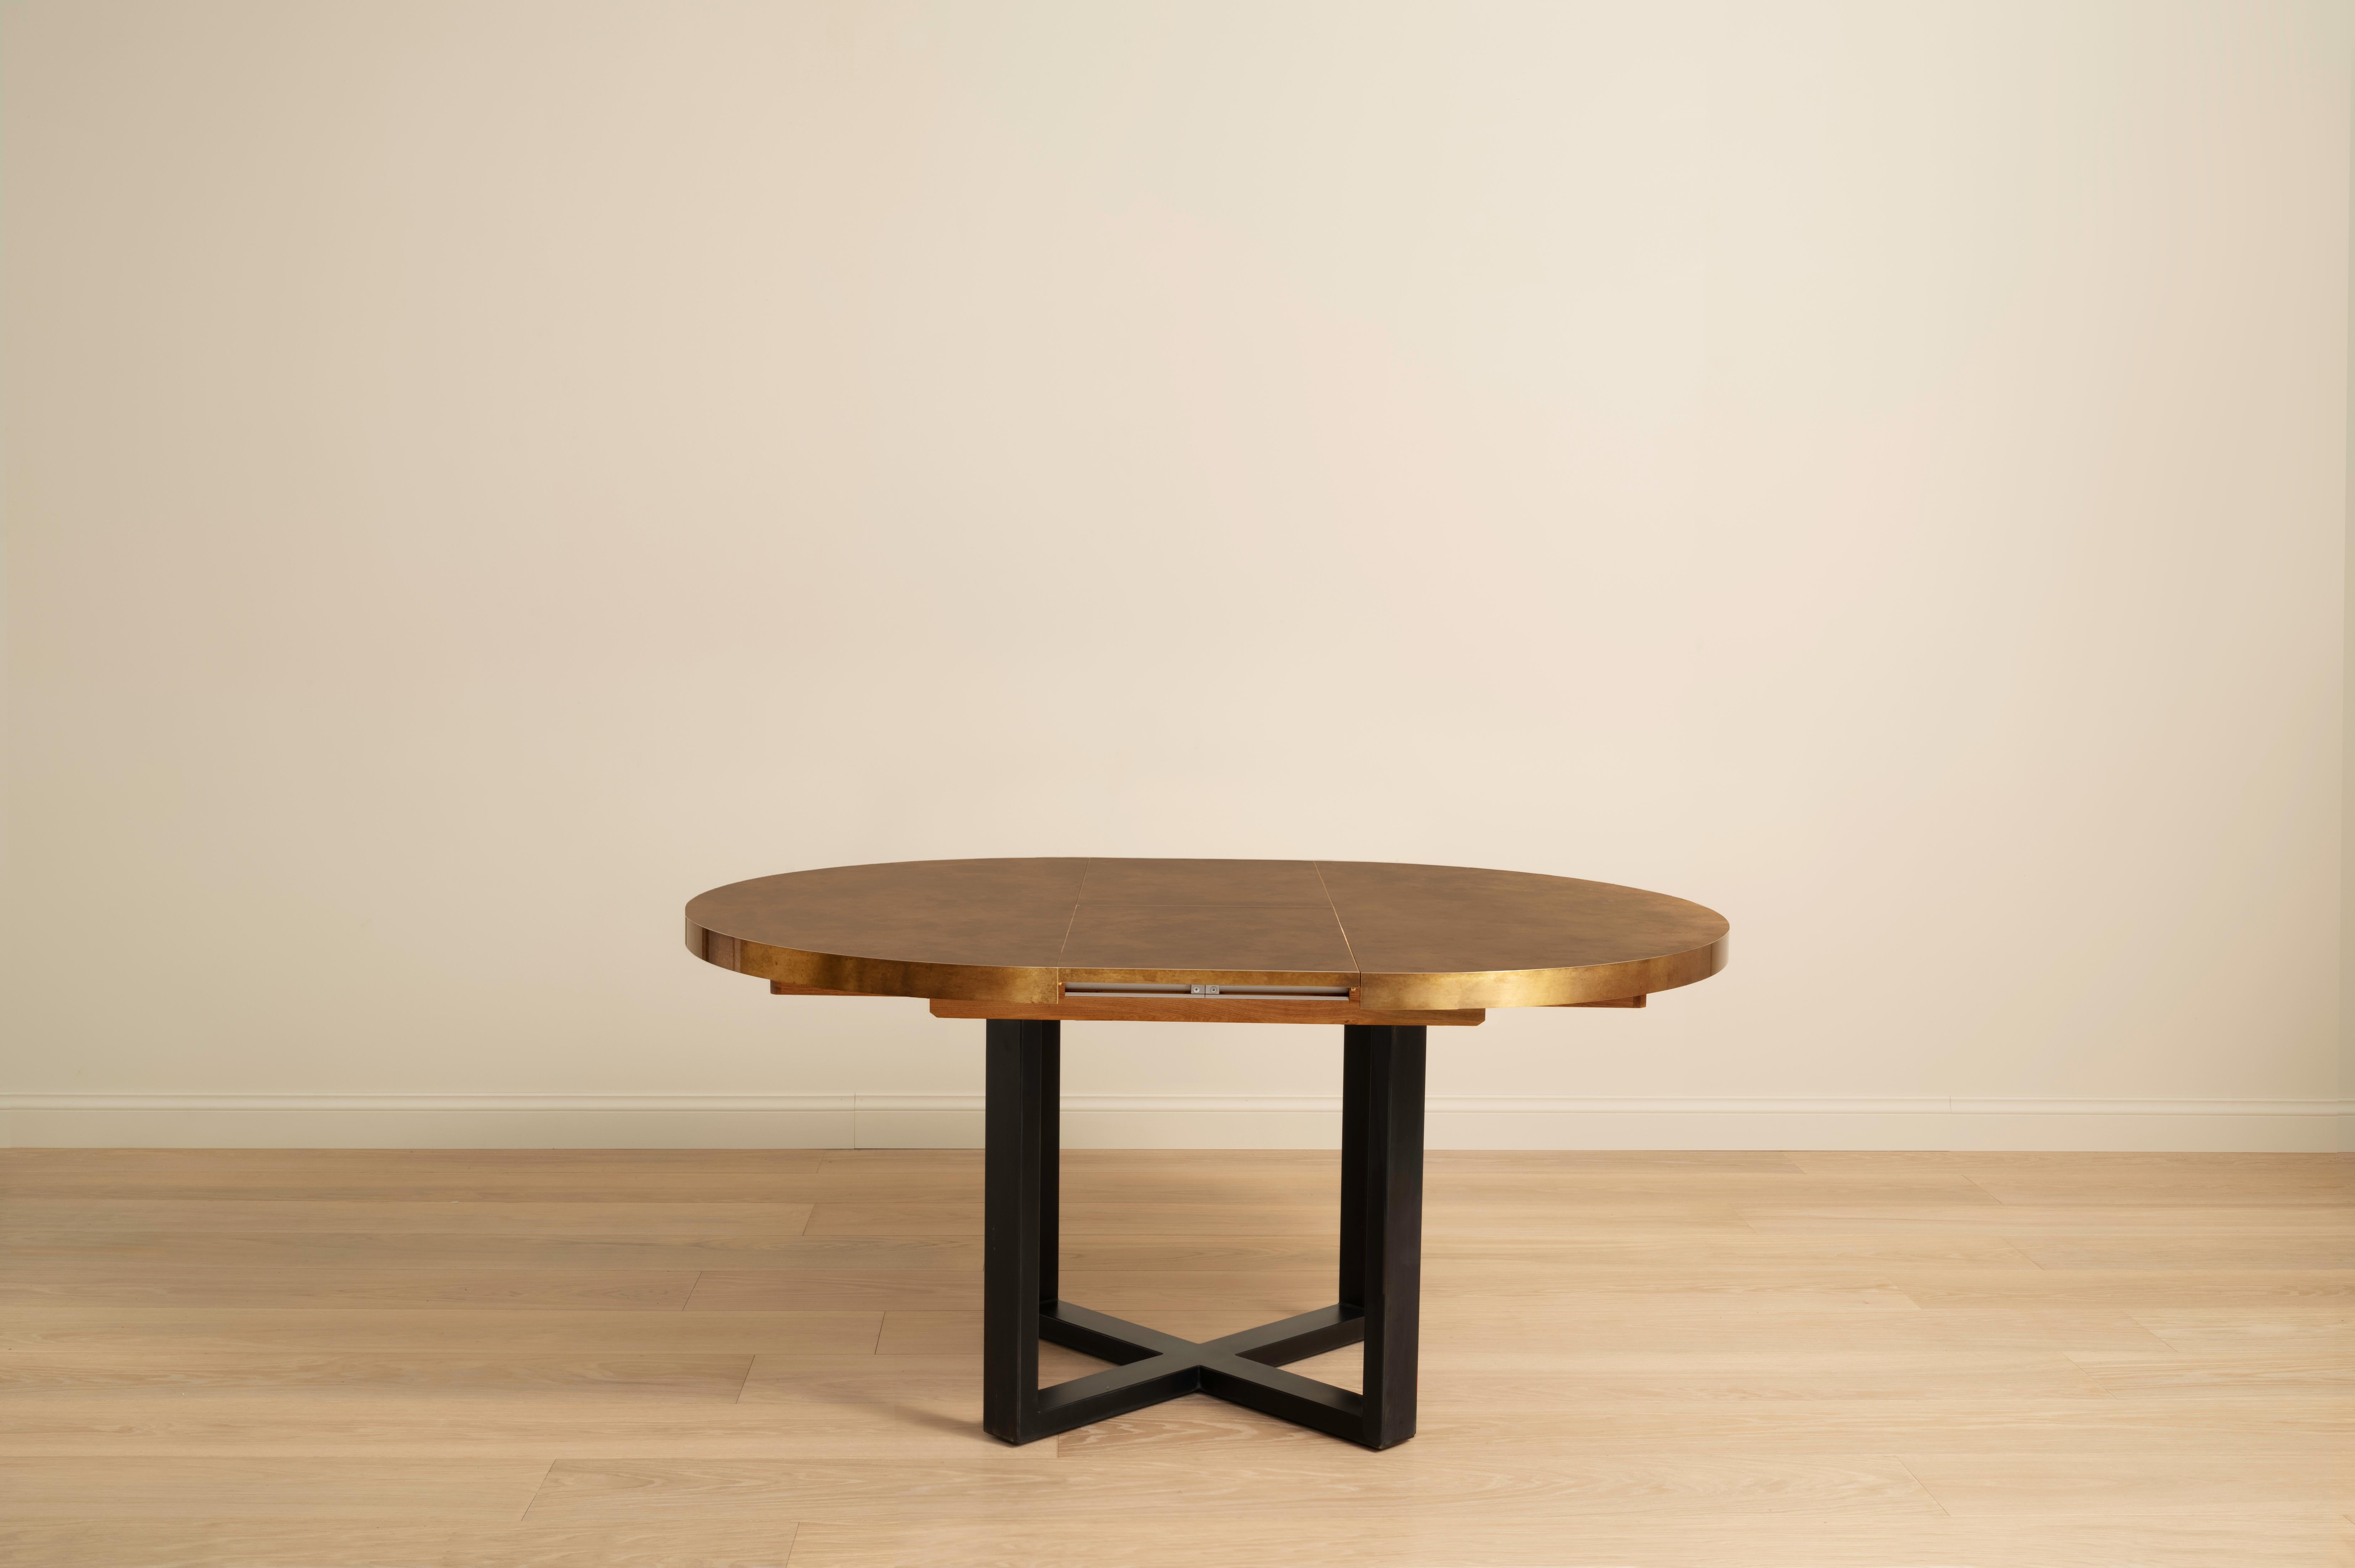 Hand-Crafted Rupert Bevan Orlando Extending Brass Dining Table For Sale